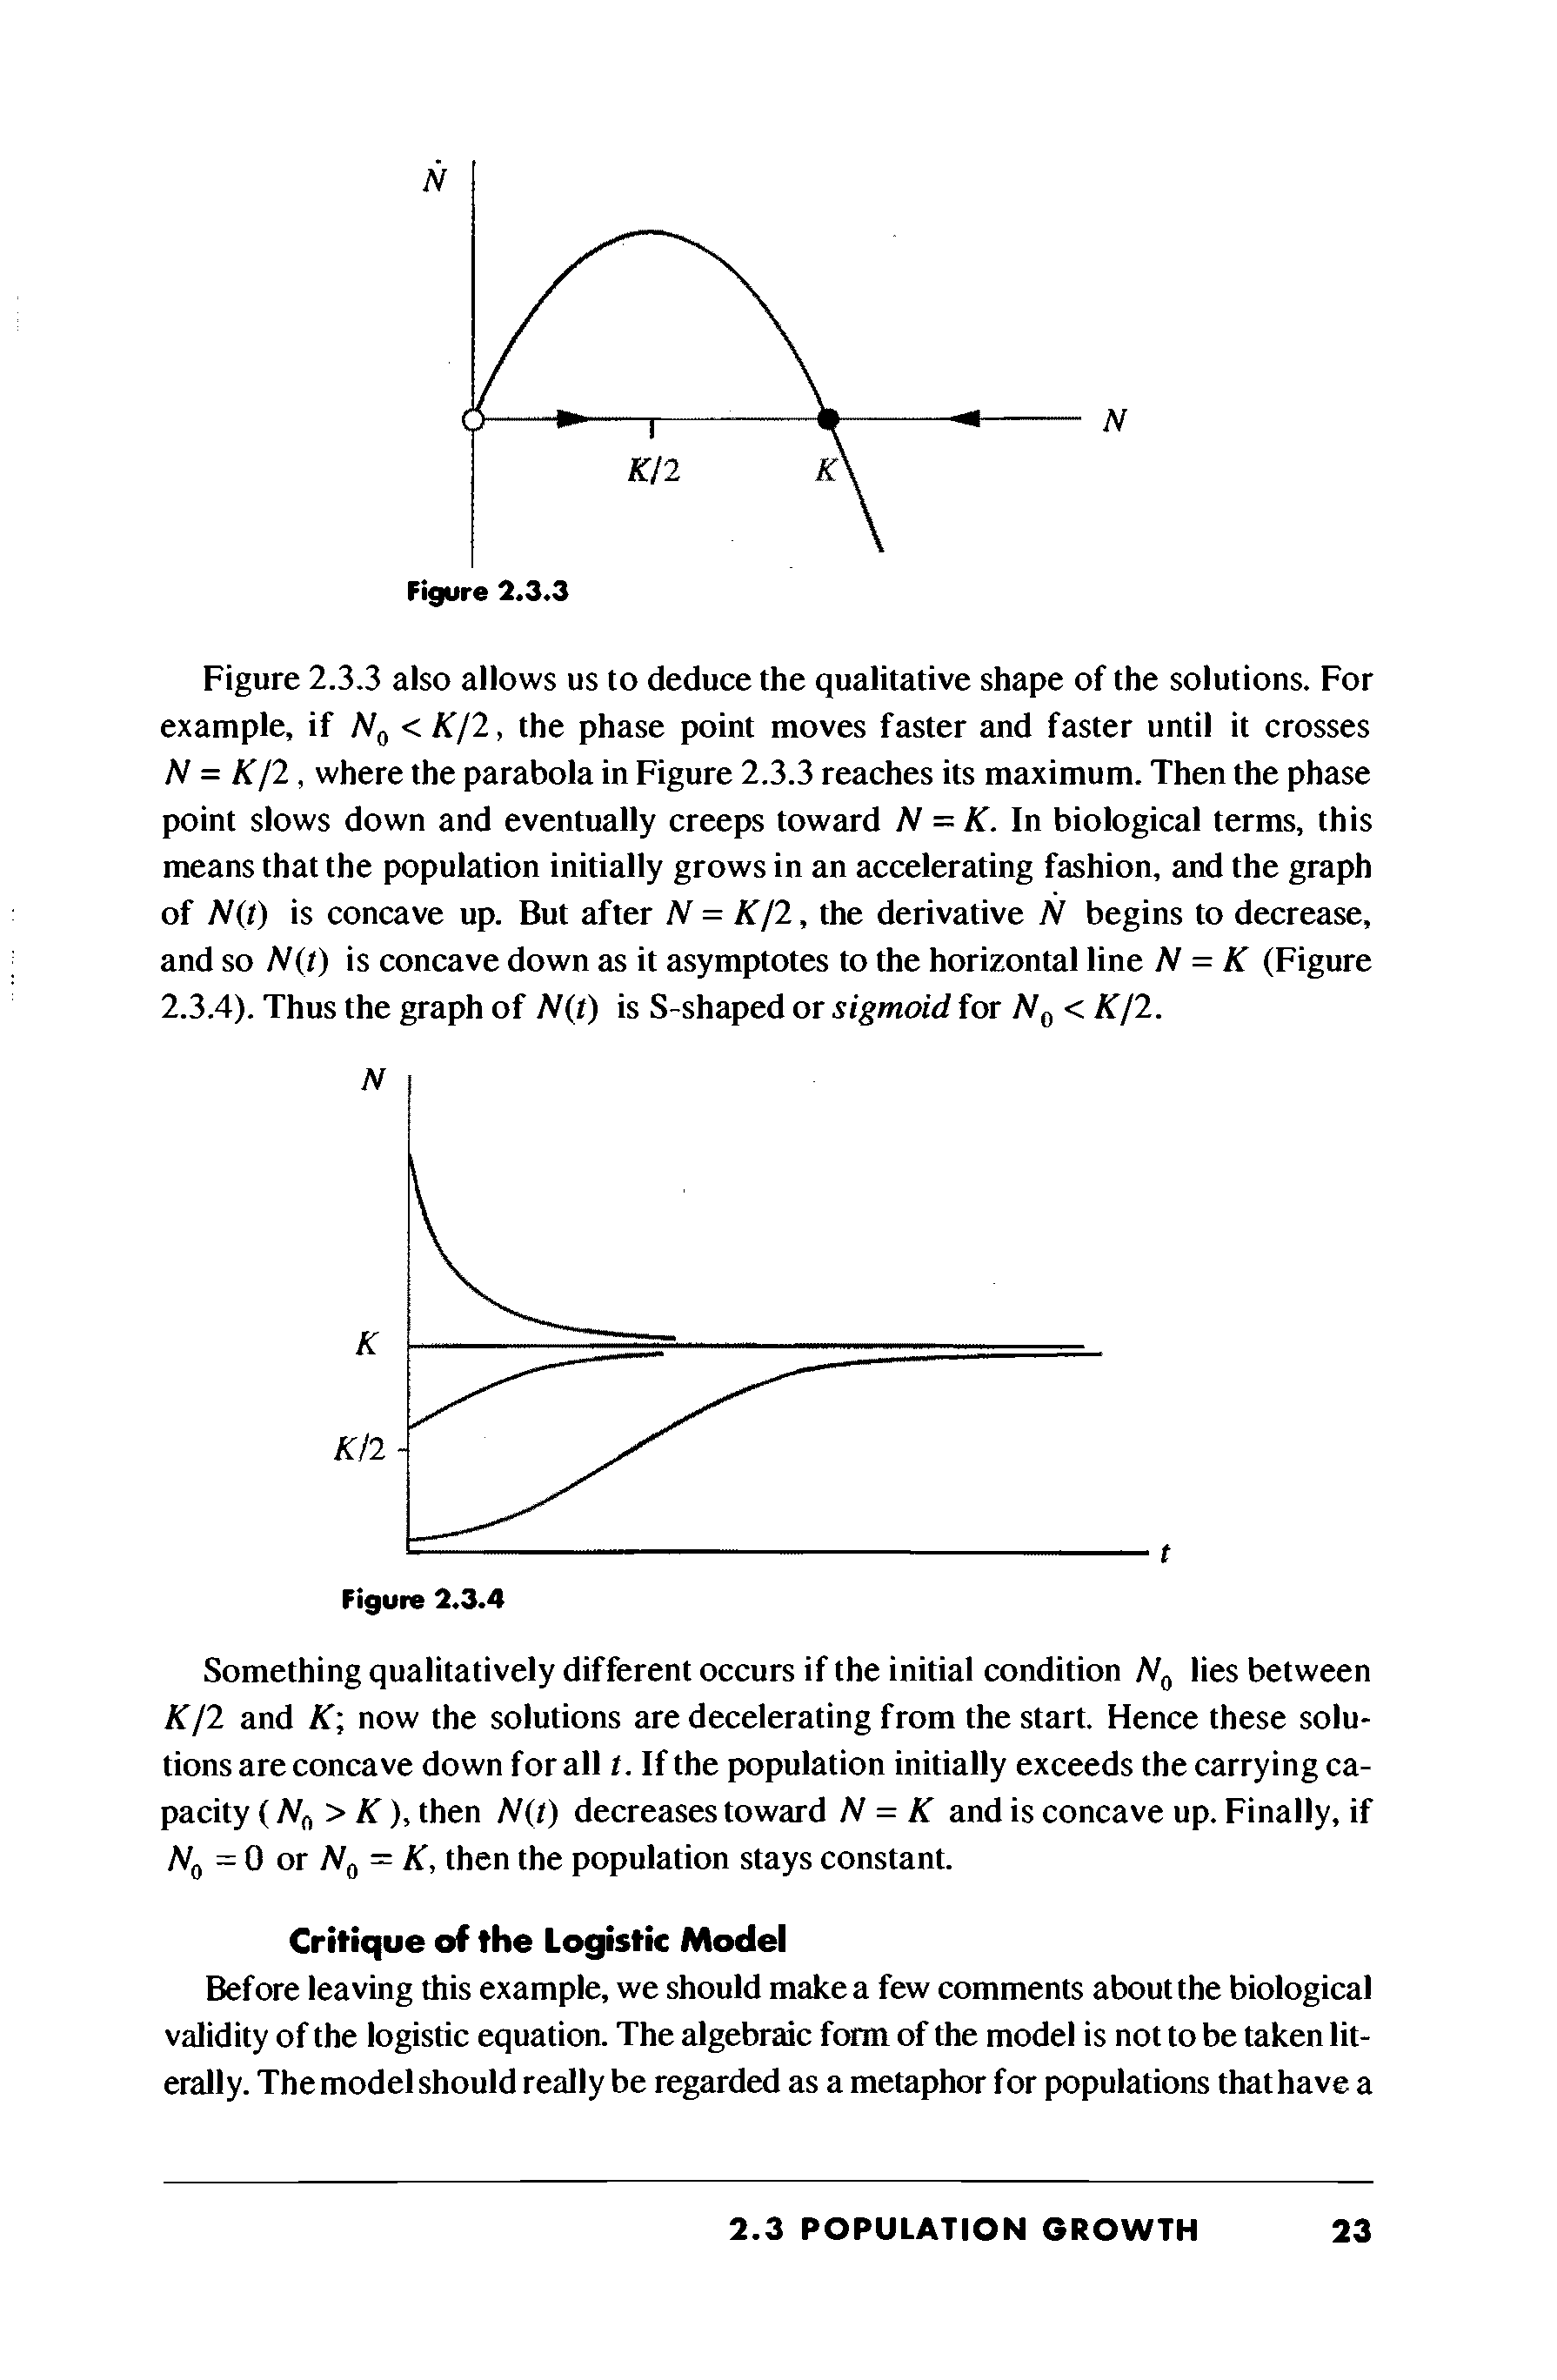 Figure 2.3.3 also allows us to deduce the qualitative shape of the solutions. For example, if <KI l, the phase point moves faster and faster until it crosses N = K/l, where the parabola in Figure 2.3.3 reaches its maximum. Then the phase point slows down and eventually creeps toward N = K. In biological terms, this means that the population initially grows in an accelerating fashion, and the graph of N t) is concave up. But after N = K/l, the derivative N begins to decrease, and so N(t) is concave down as it asymptotes to the horizontal line N = K (Figure 2.3.4). Thus the graph of N t) is S-shaped or sigmoid for TVg < K/l.